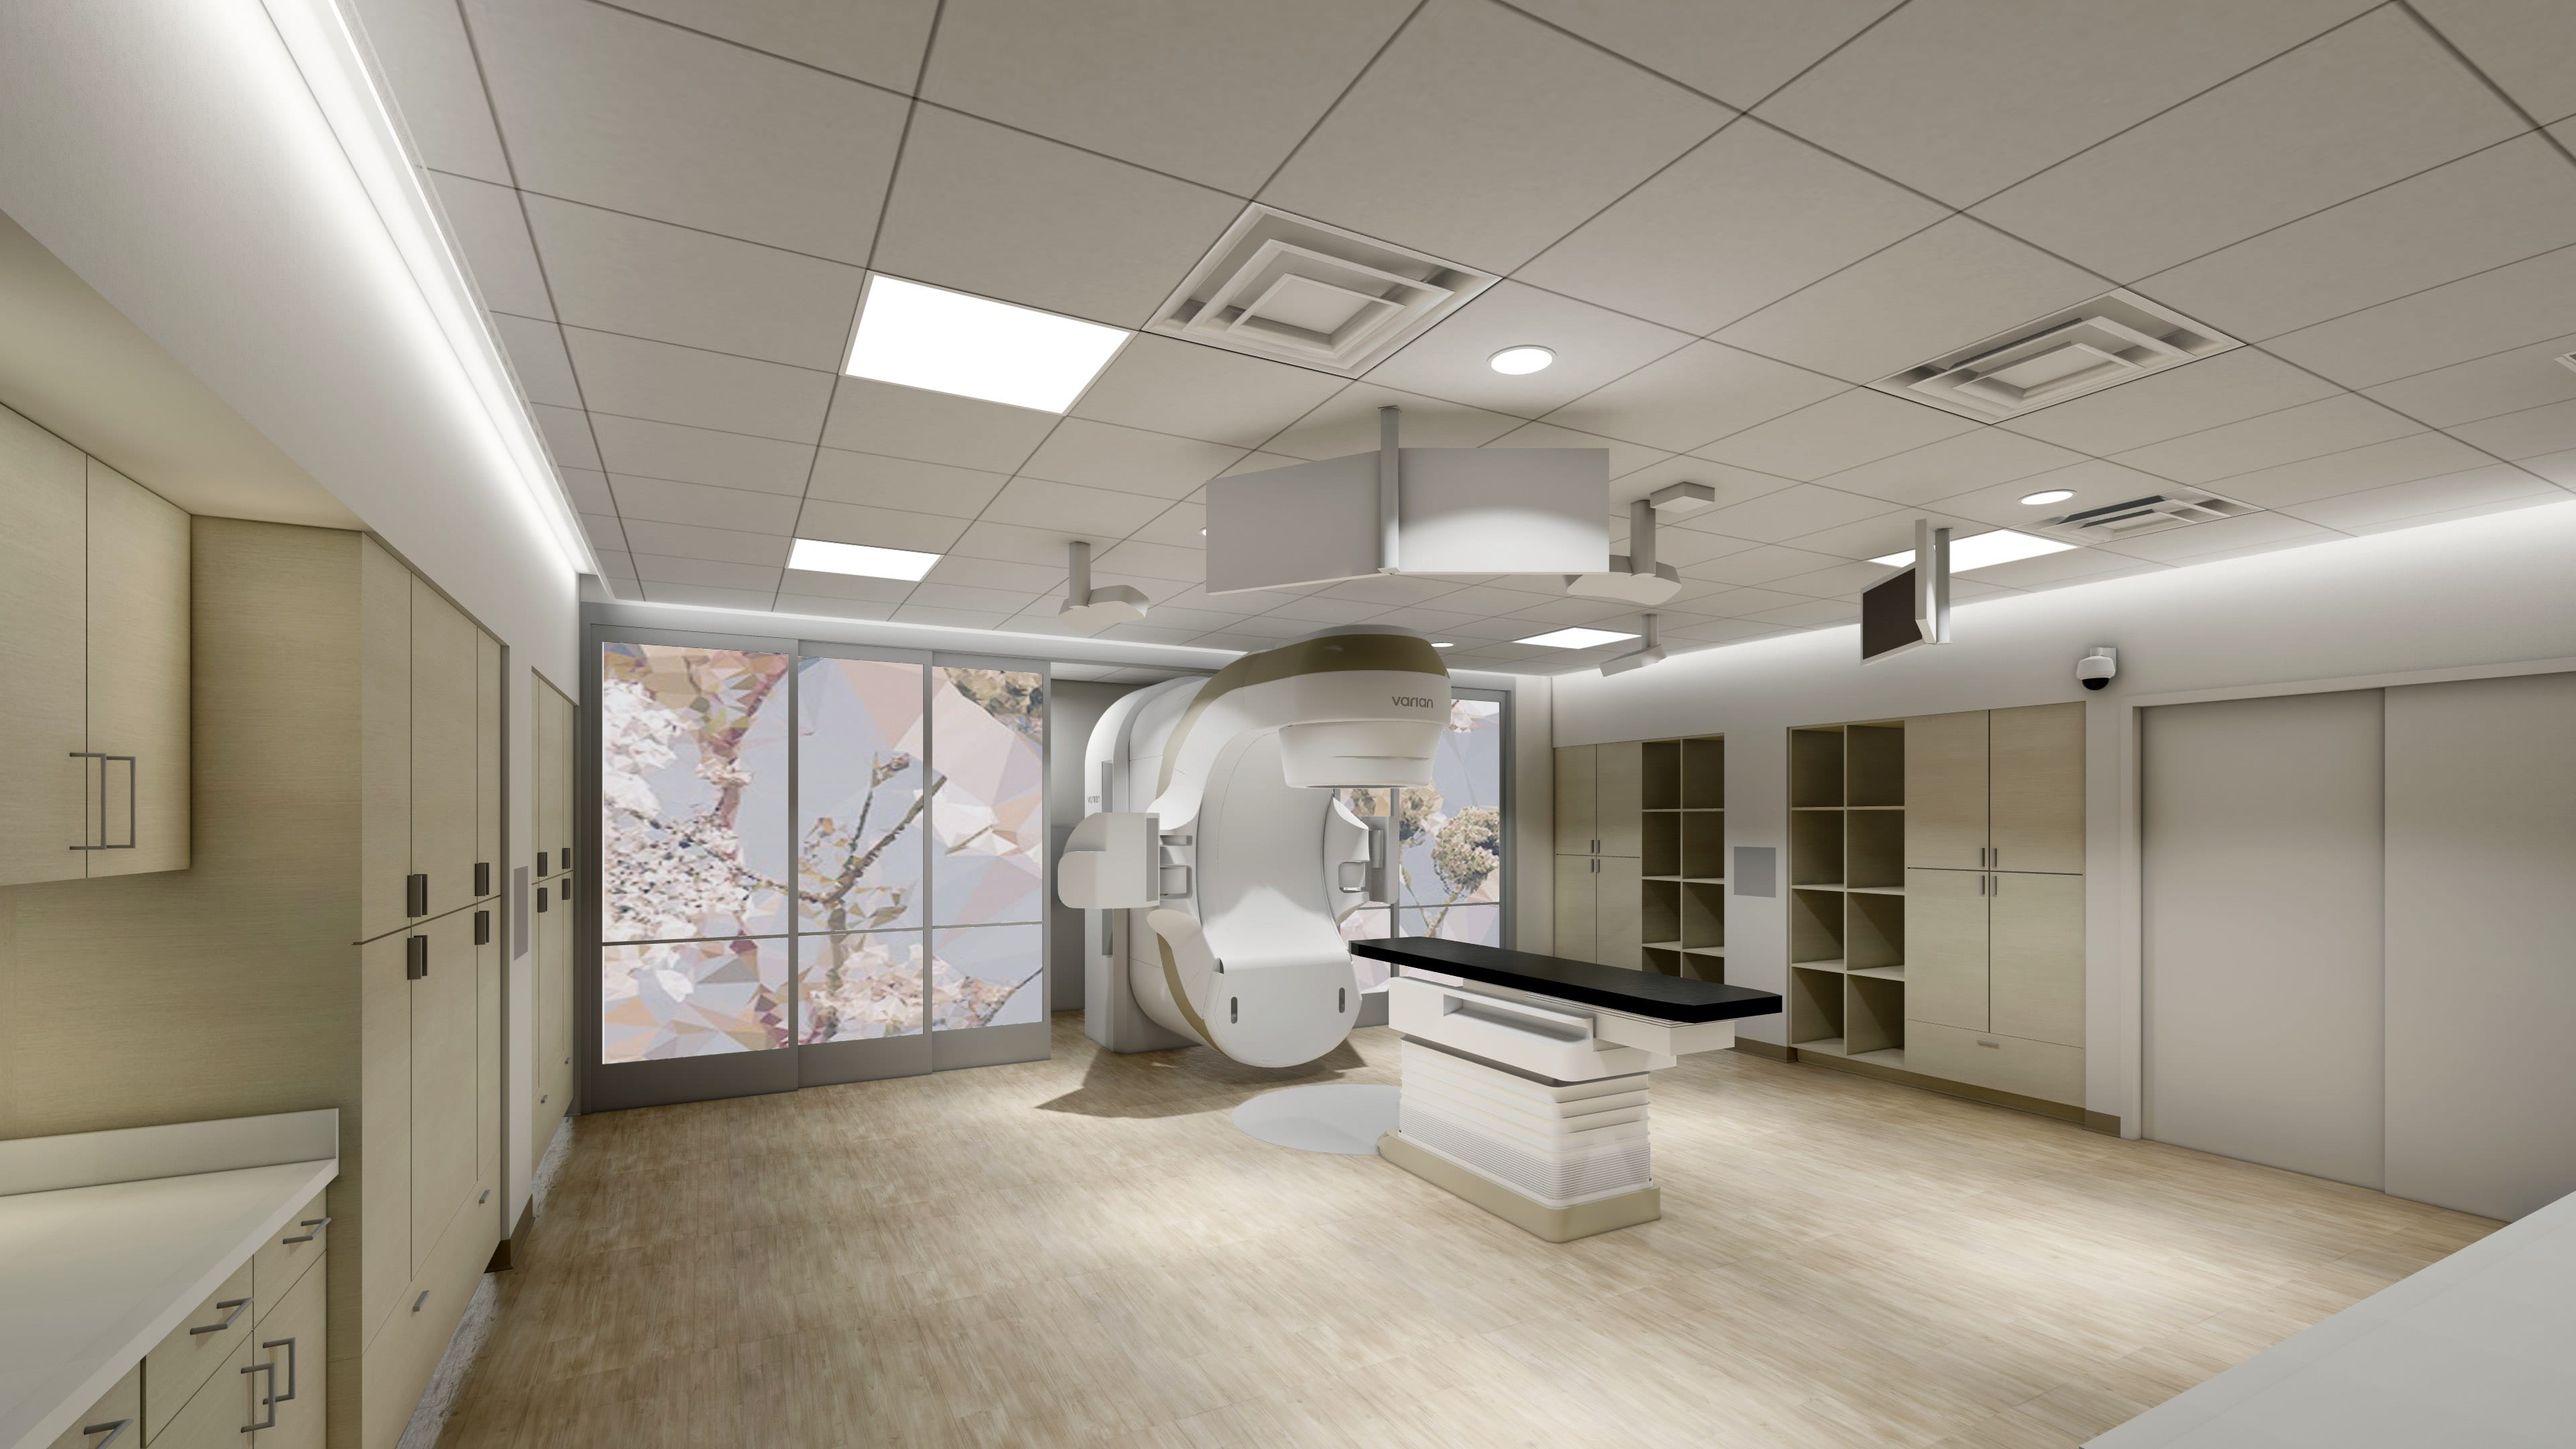 A rendering of what the new LINAC radiation therapy machine will look like..